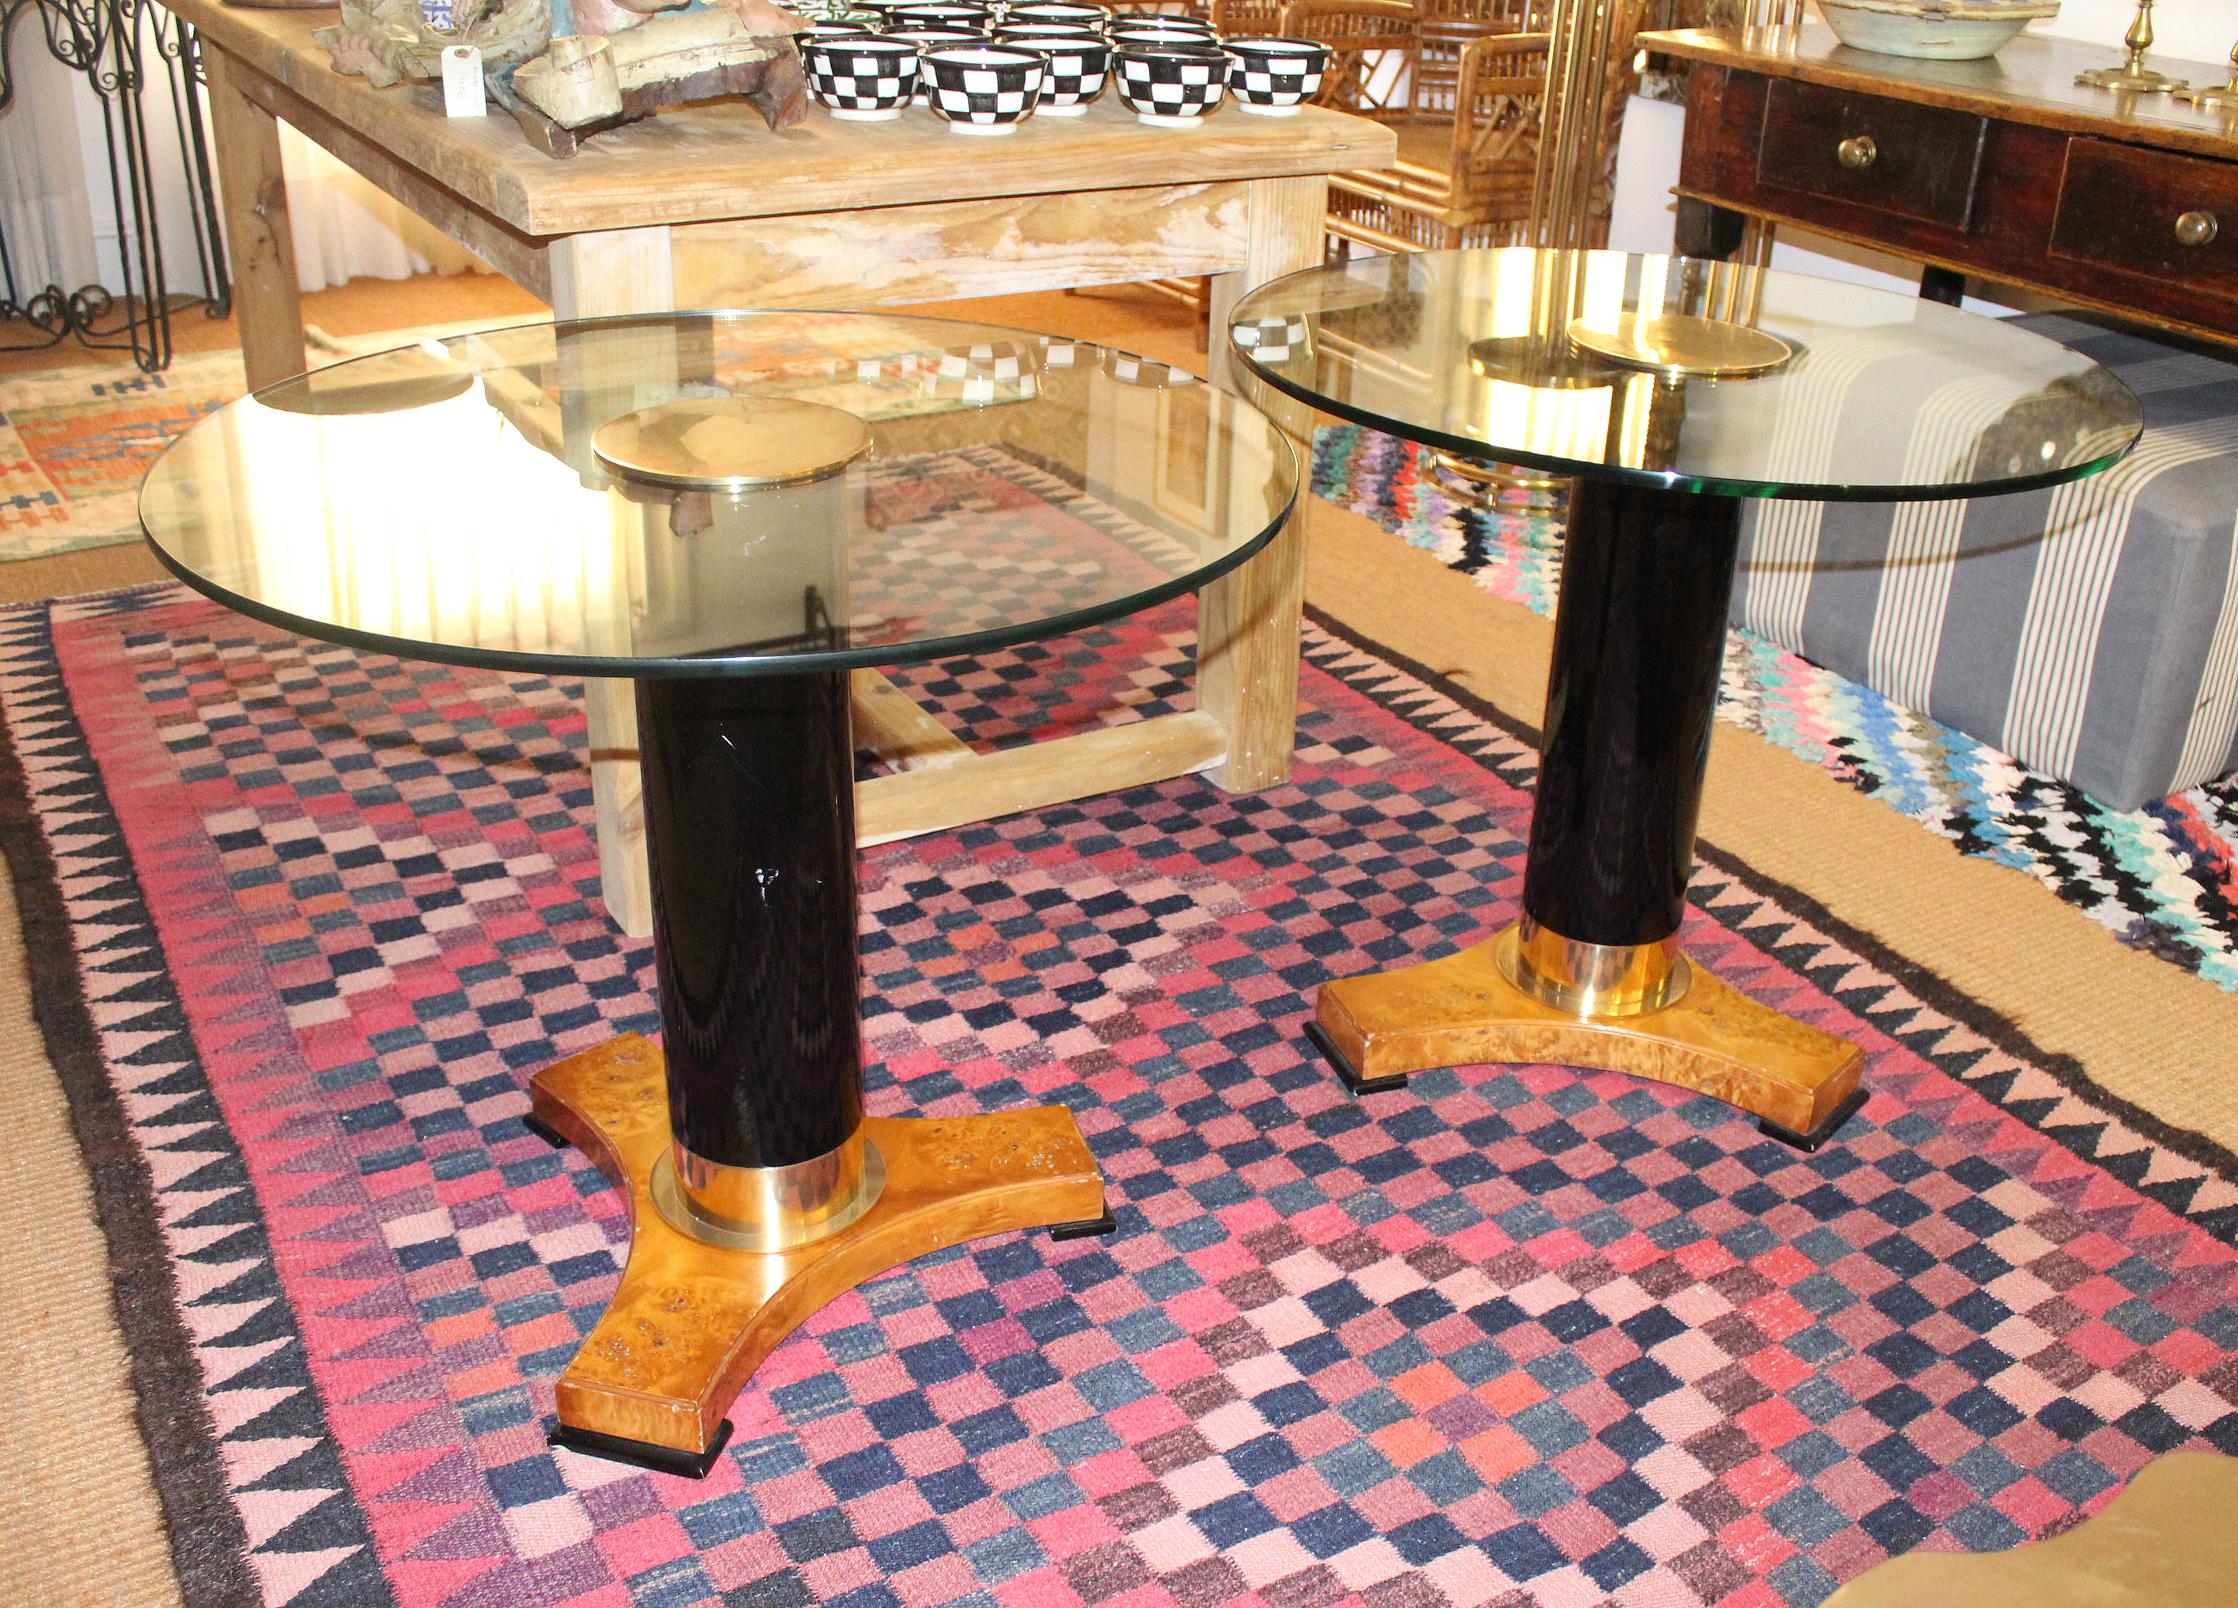 1980s elegant pair of Italian round glass top tables with a brass decorated wooden pedestal and wood root base

